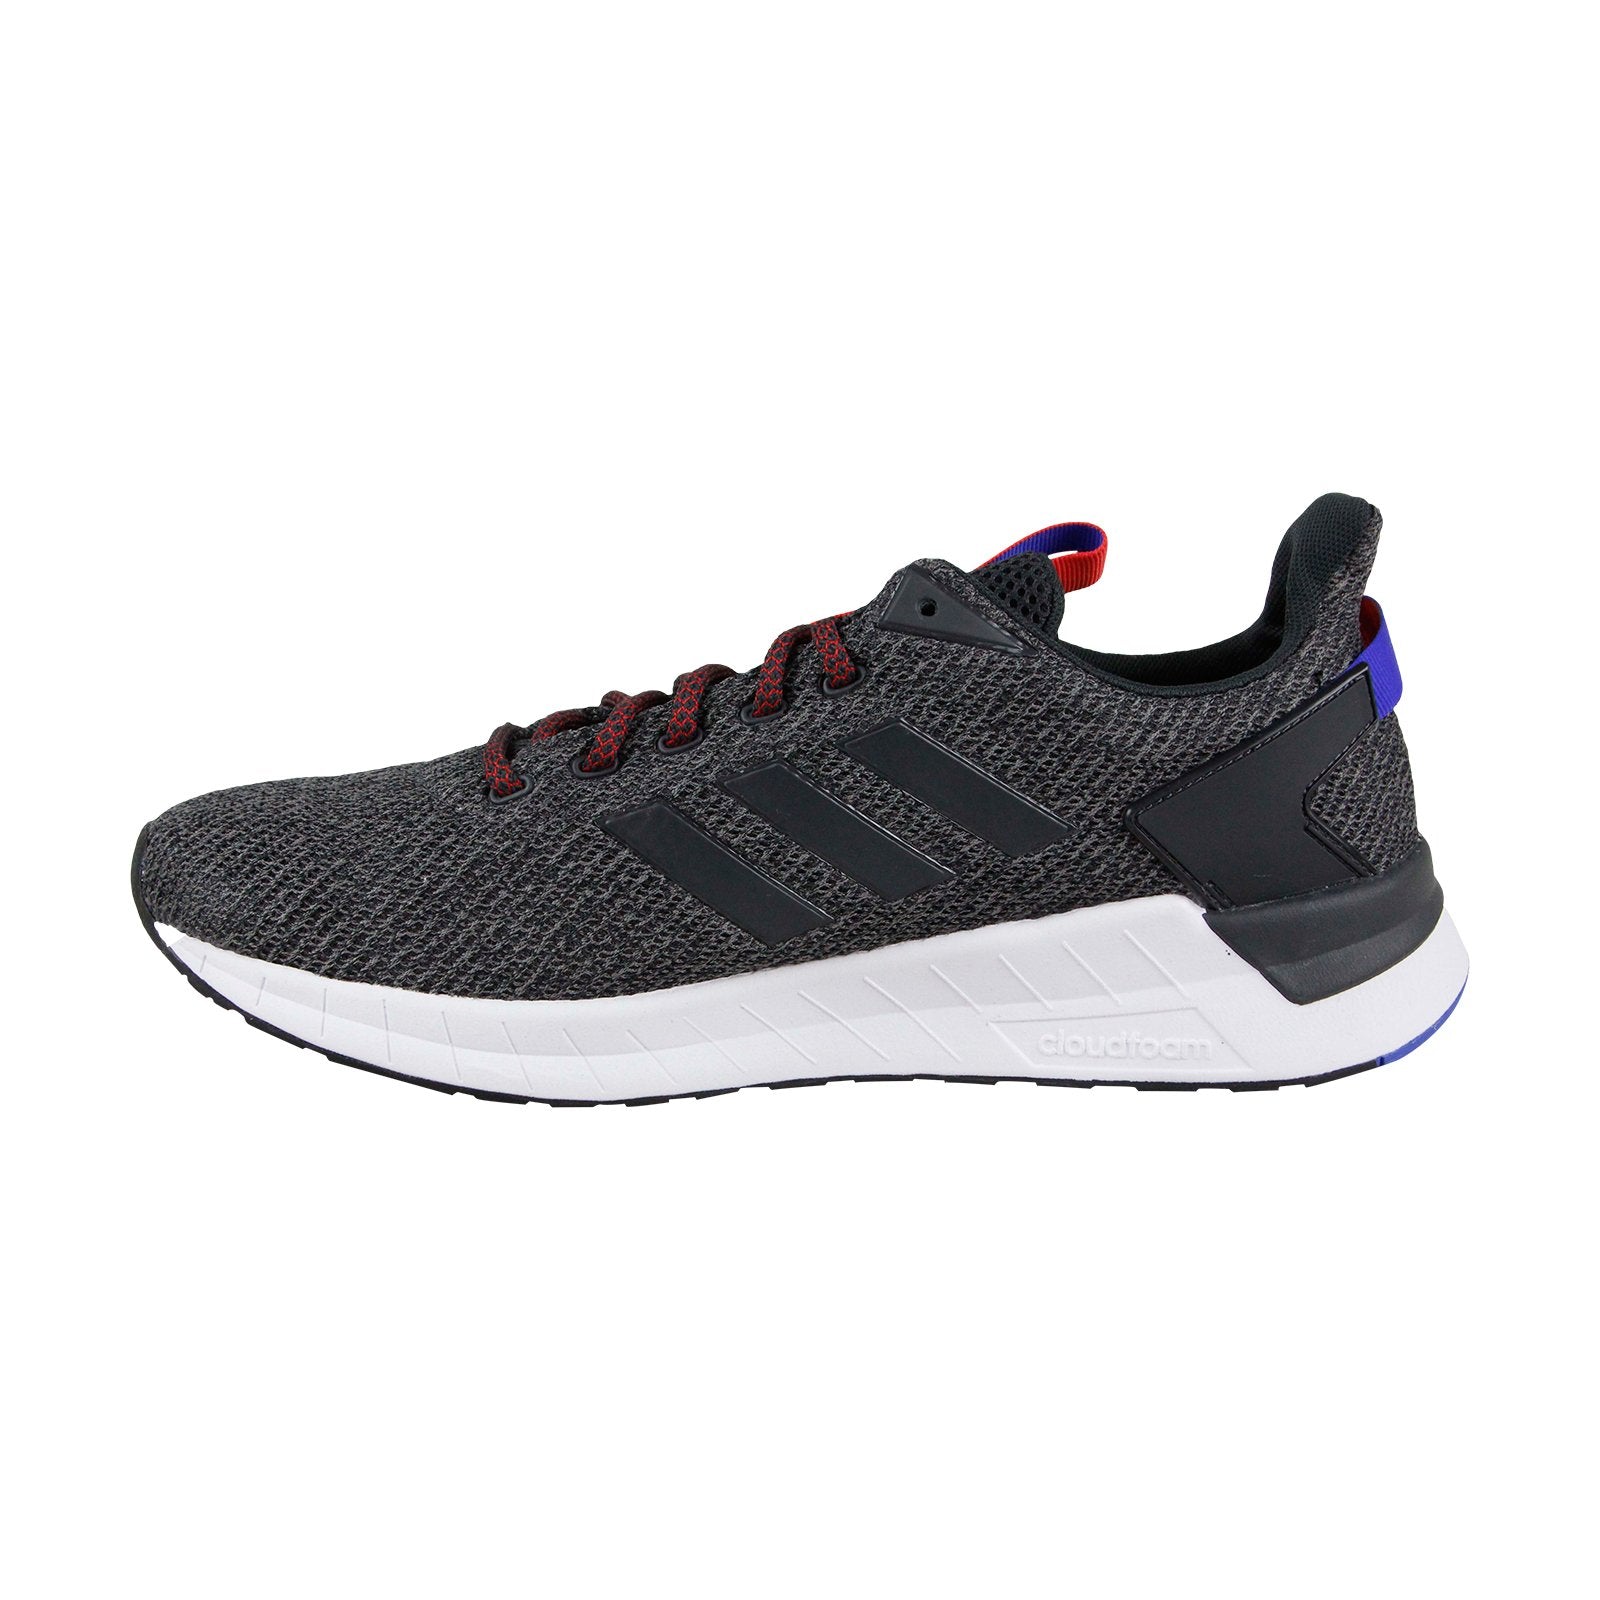 Adidas Questar Ride B44809 Mens Gray Lace Up Athletic Running S - Shoes